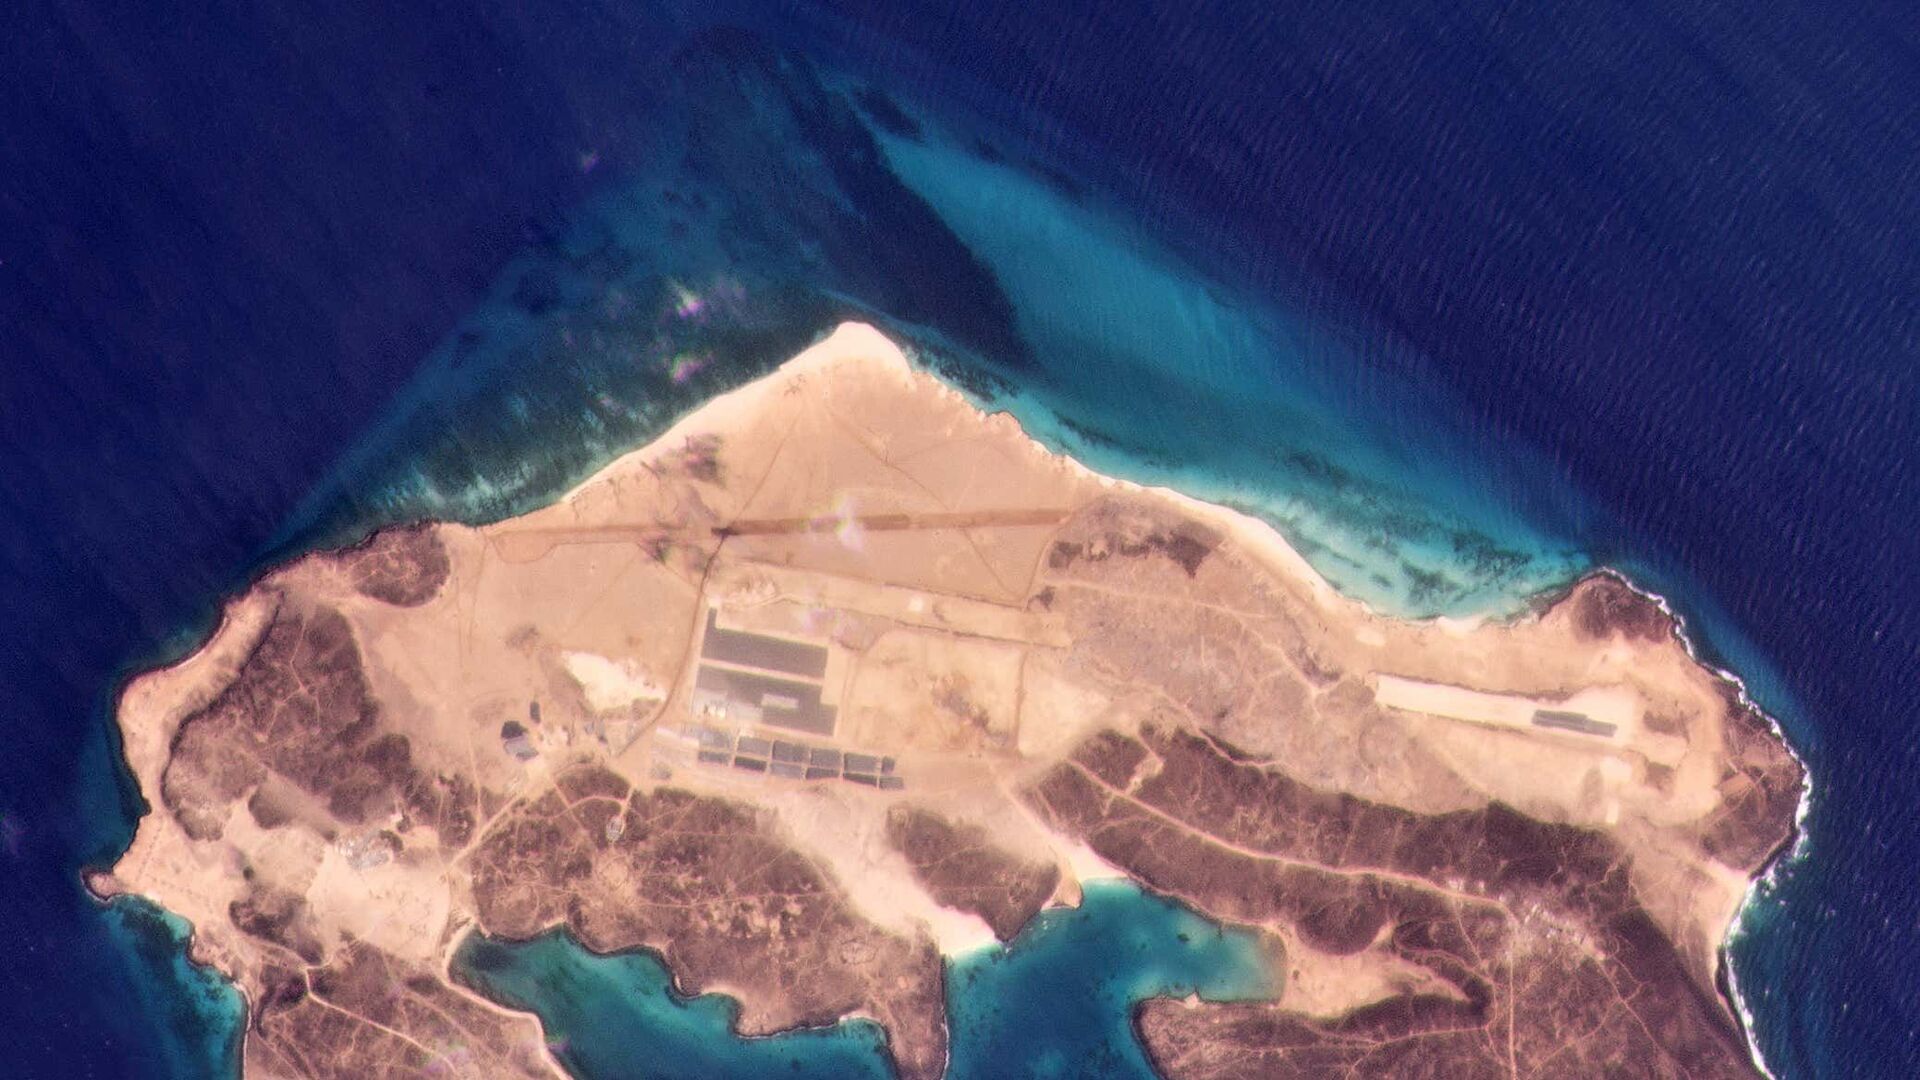 Photos: Mysterious Airfield Construction Spotted on Yemeni Island Formerly Controlled by UAE - Sputnik International, 1920, 10.03.2021